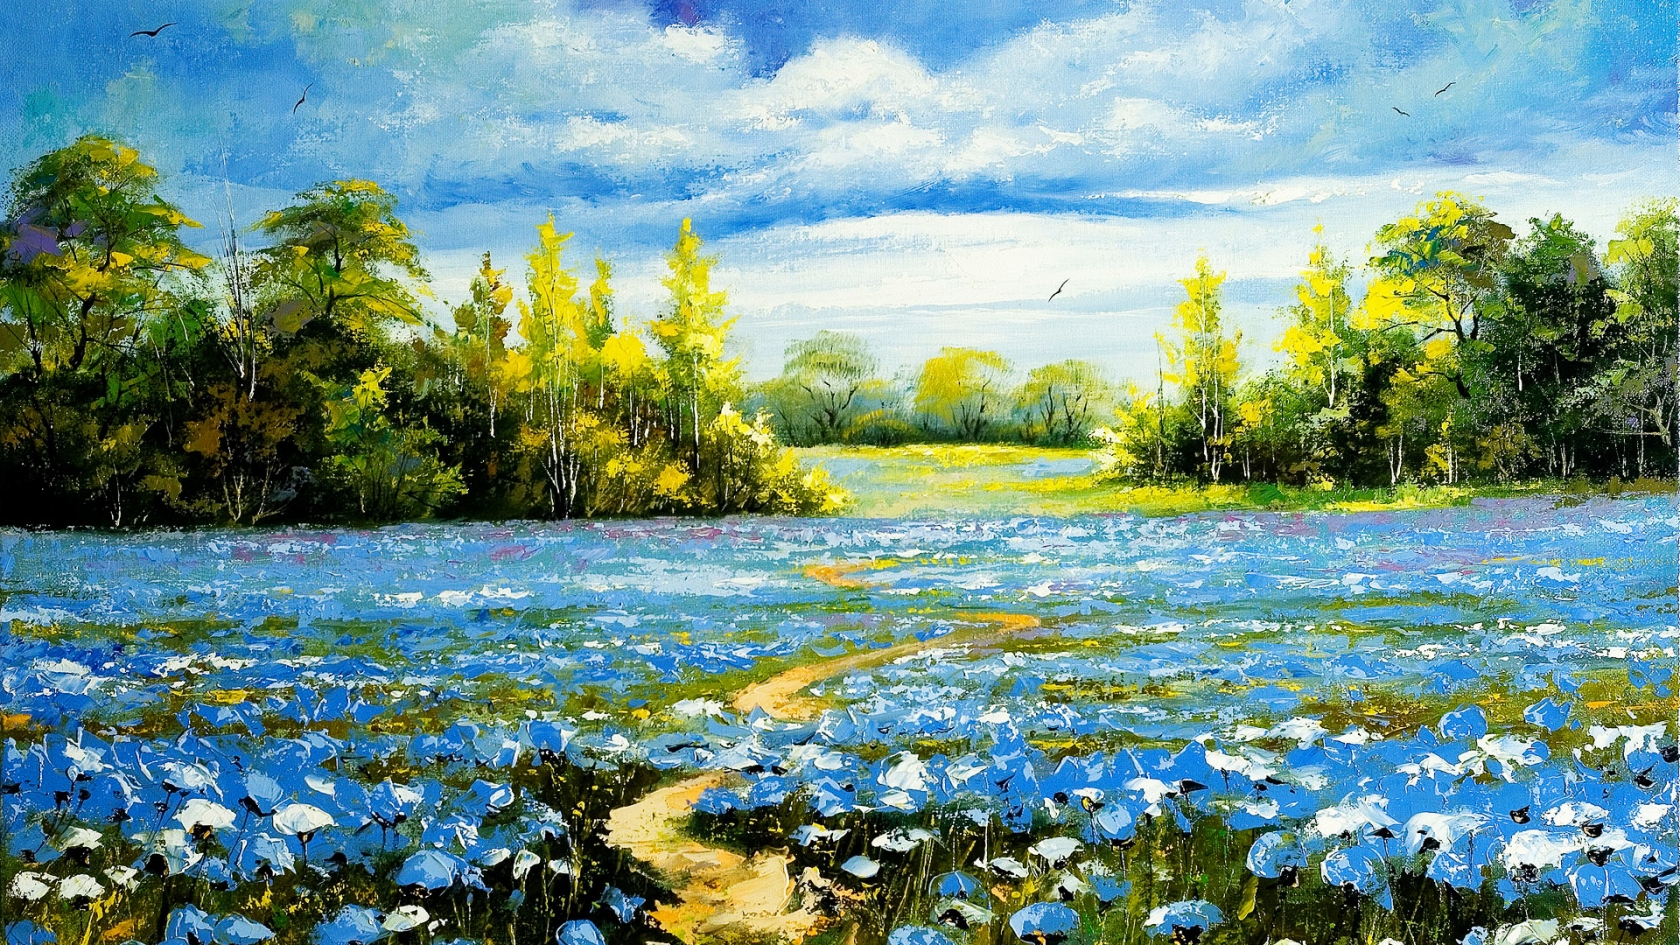 Landscape Oil Painting for 1680 x 945 HDTV resolution